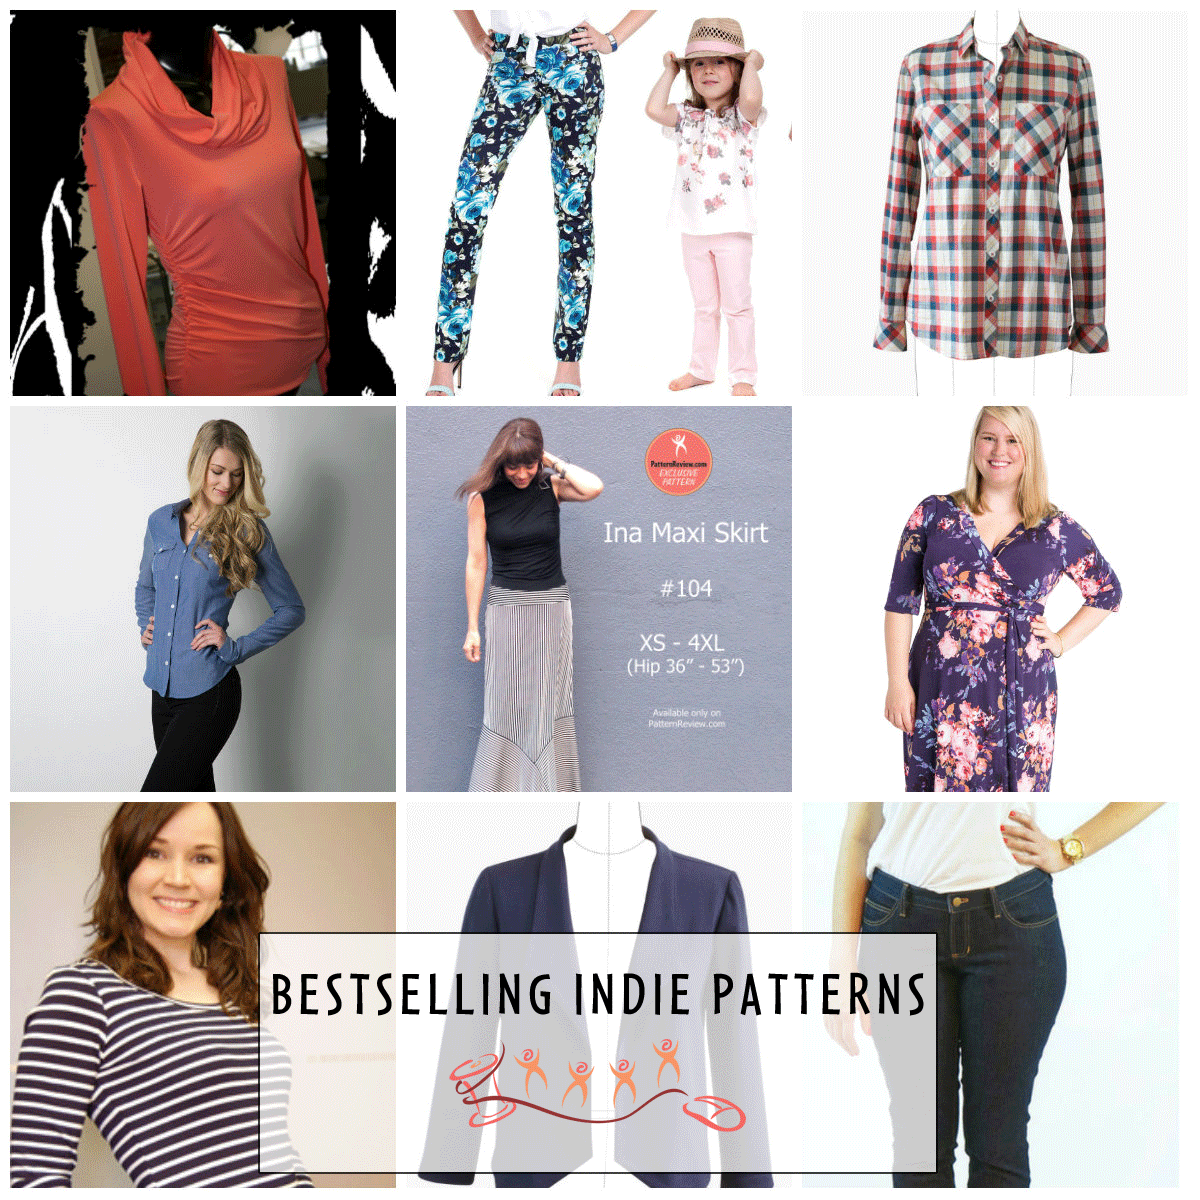 Best-Selling Indie Sewing Patterns 10/8/16 - PatternReview.com Blog